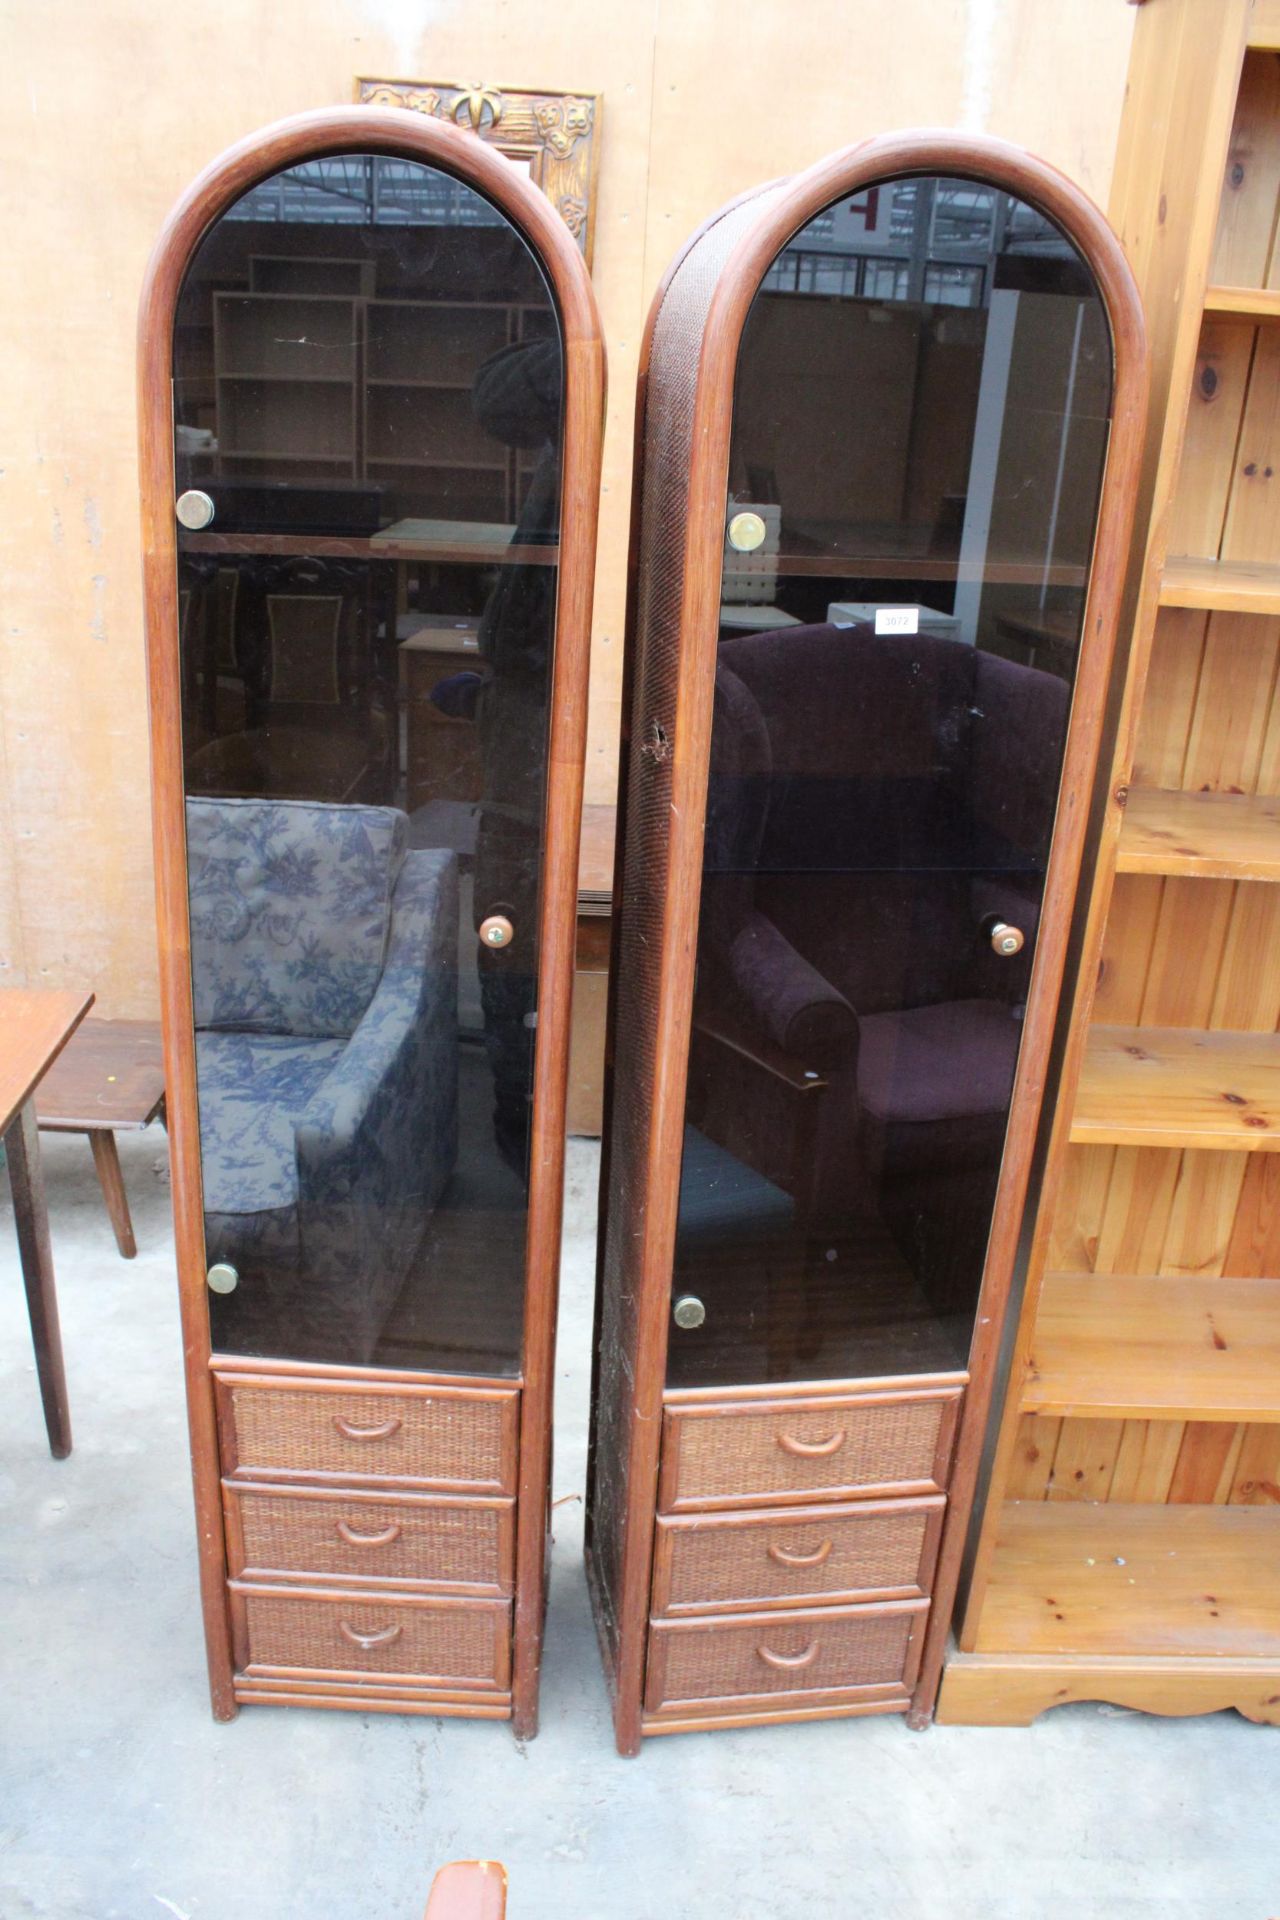 A PAIR OF DOME TOP WICKER DISPLAY CABINETS WITH SMOKED GLASS DOORS 16" WIDE EACH - Image 2 of 4